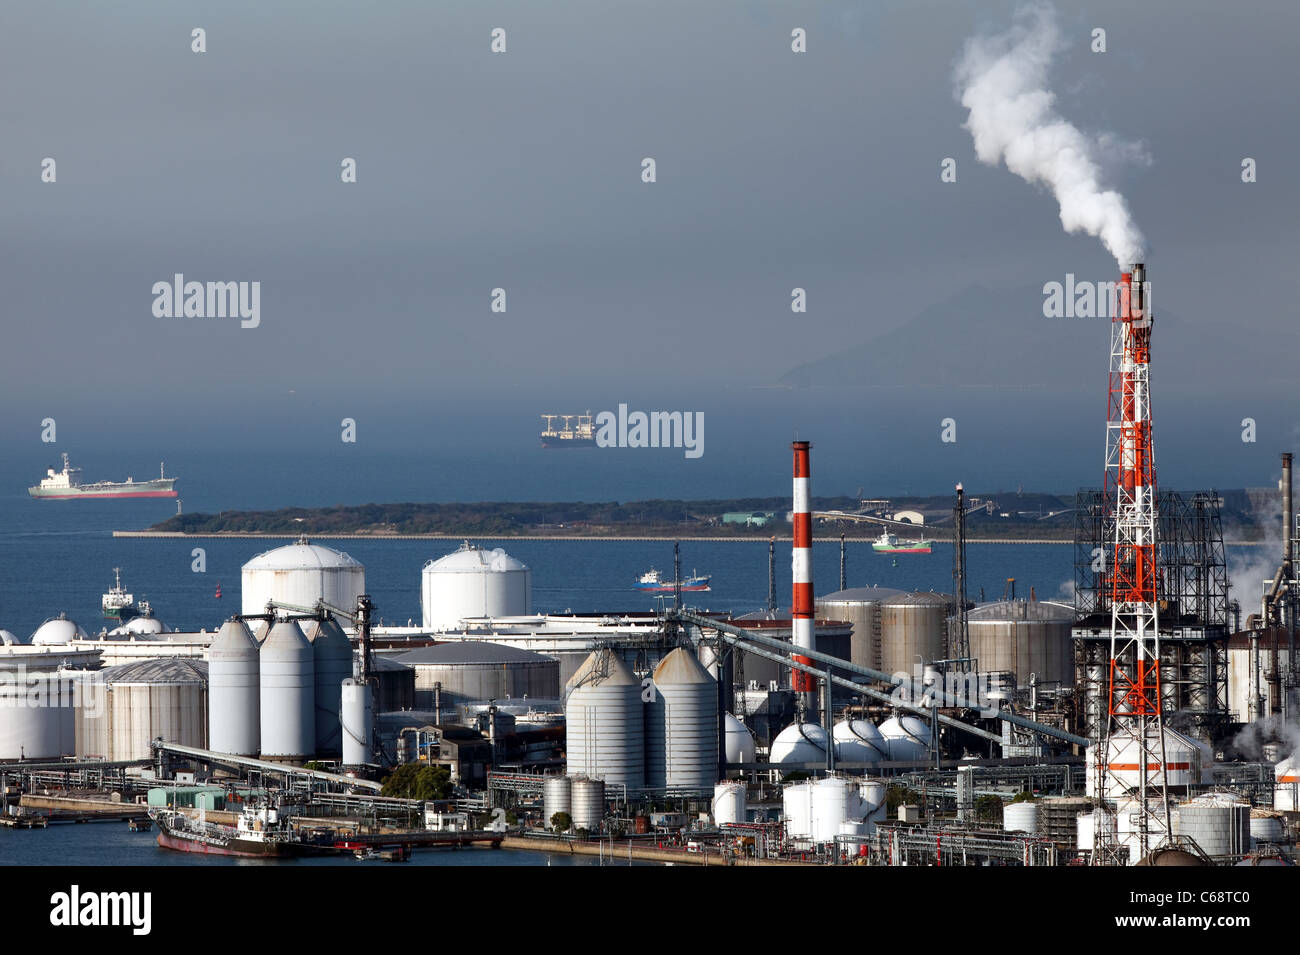 Industrial plant With smoke stacks, Industrial area Stock Photo